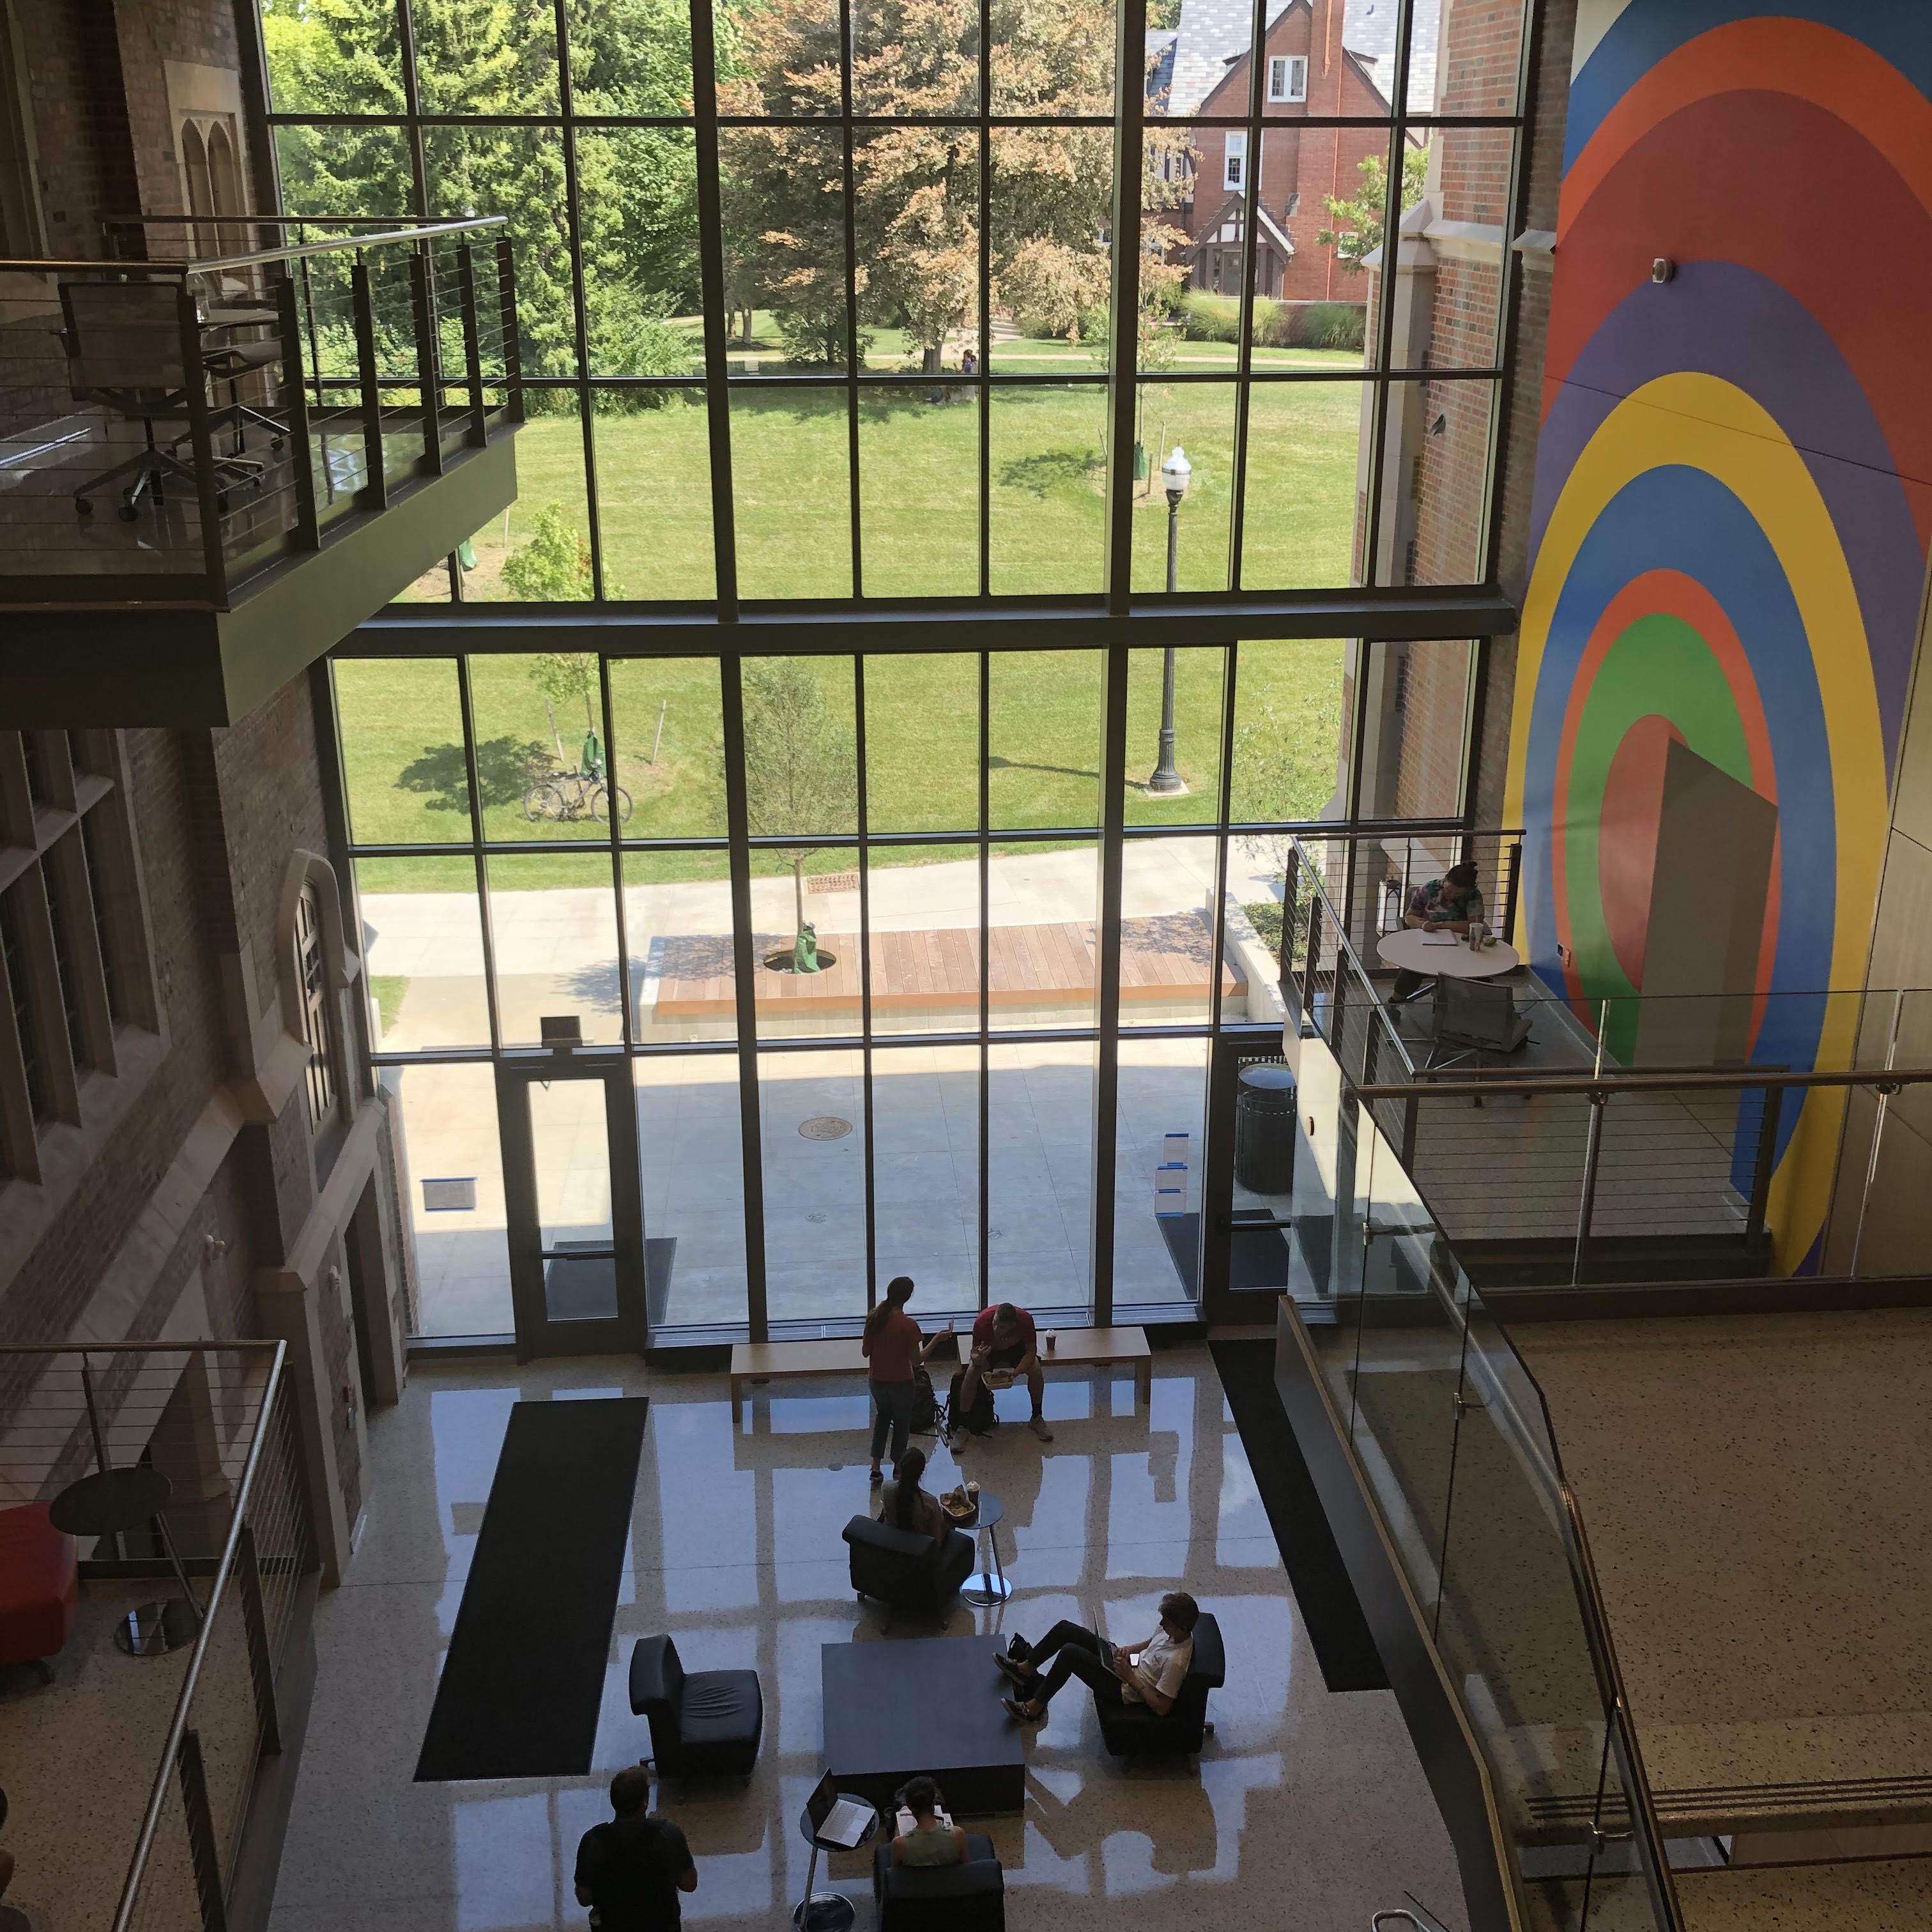 Photo of Pomere atrium looking from above after renovations